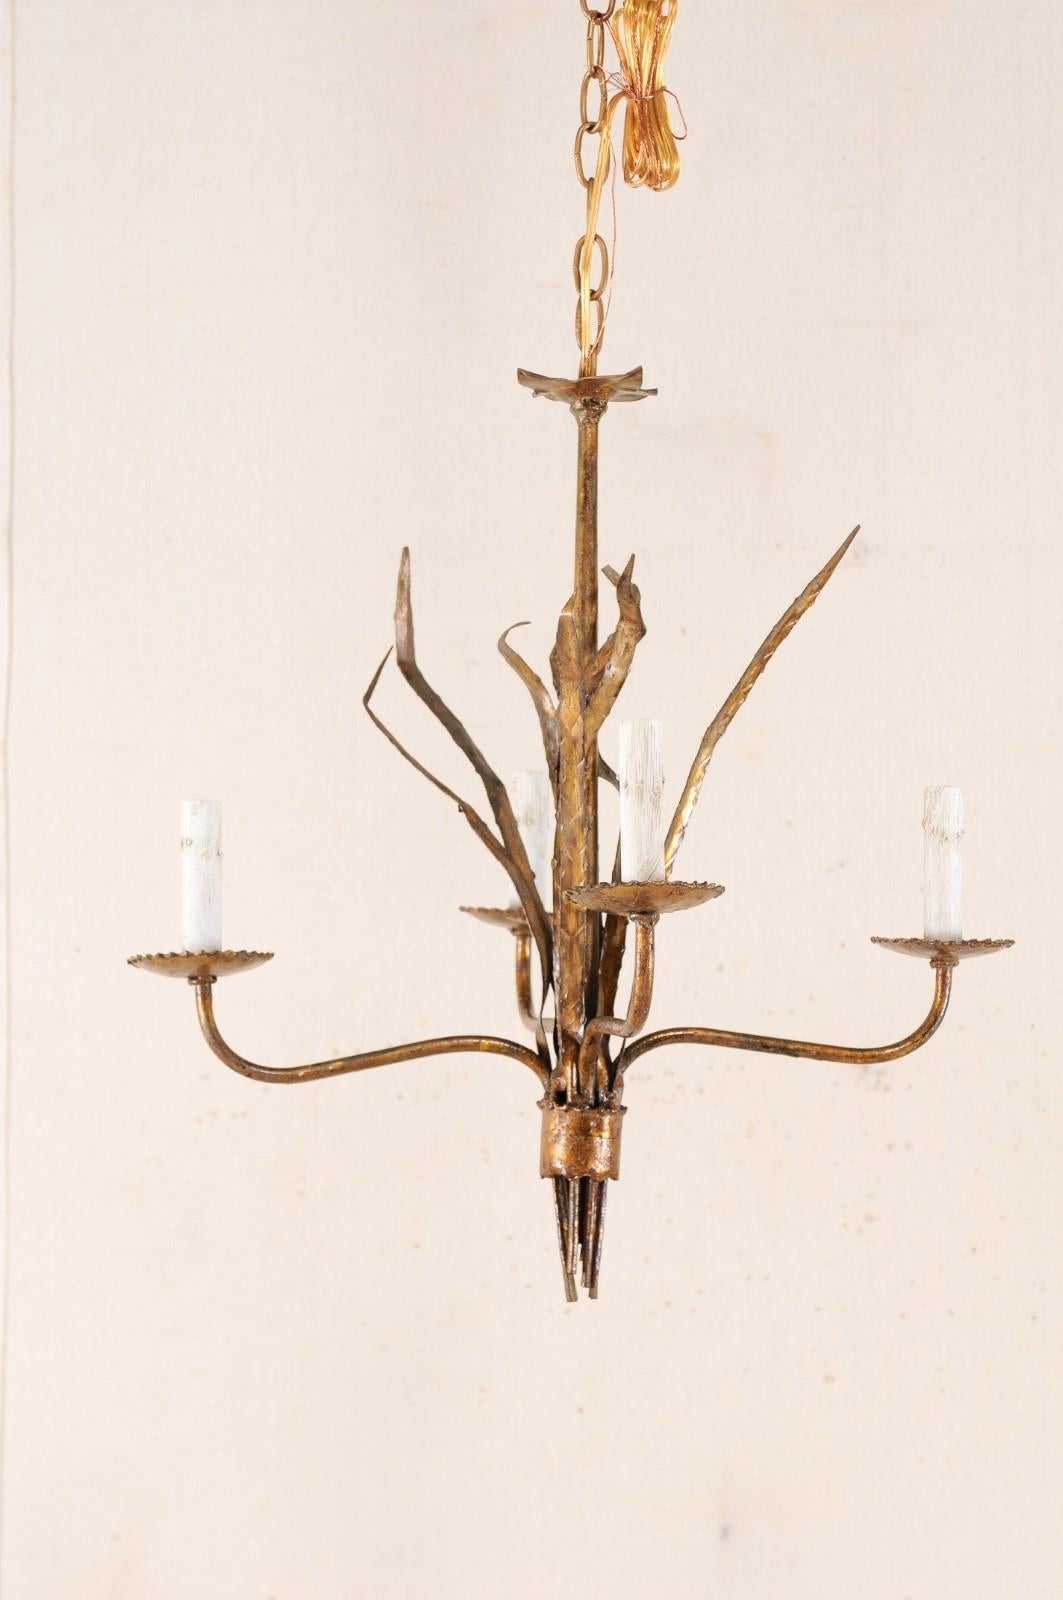 French Mid-20th Century Four-Light Iron Toned Chandelier in Leaf Foliage Motif For Sale 2